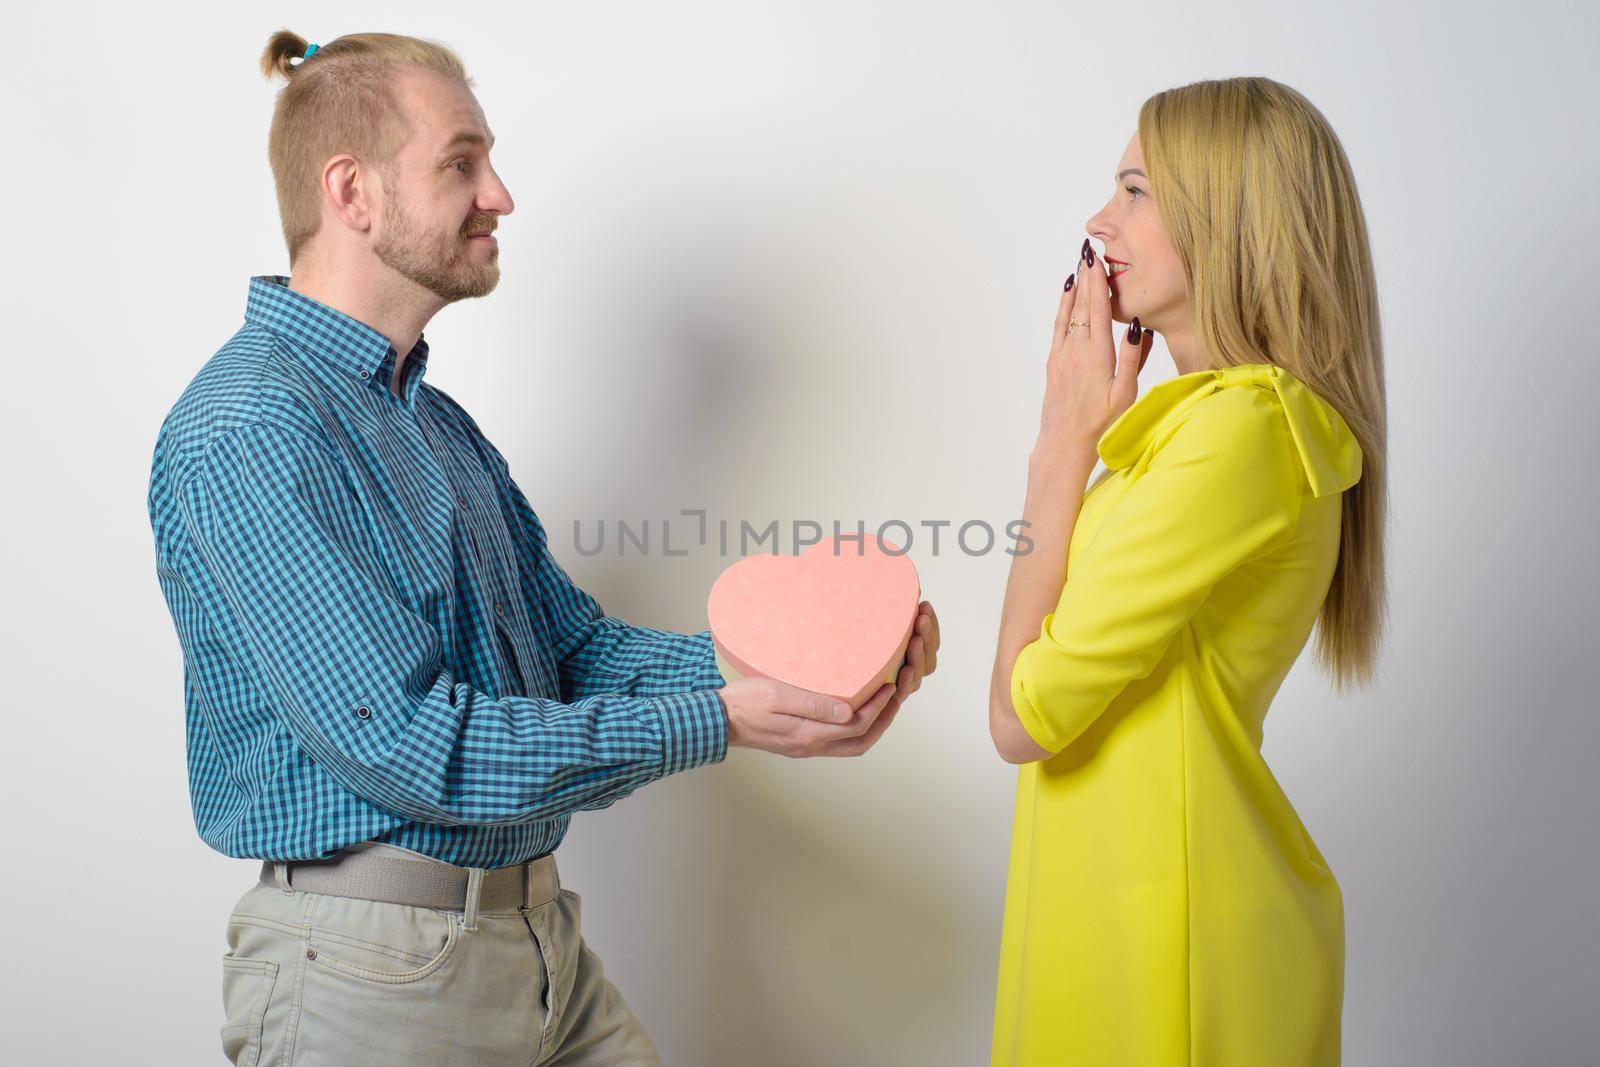 A stylish man in a checkered green shirt gives a beautiful slender girl in a yellow dress a gift box in the form of a heart. Happy couple in the studio.